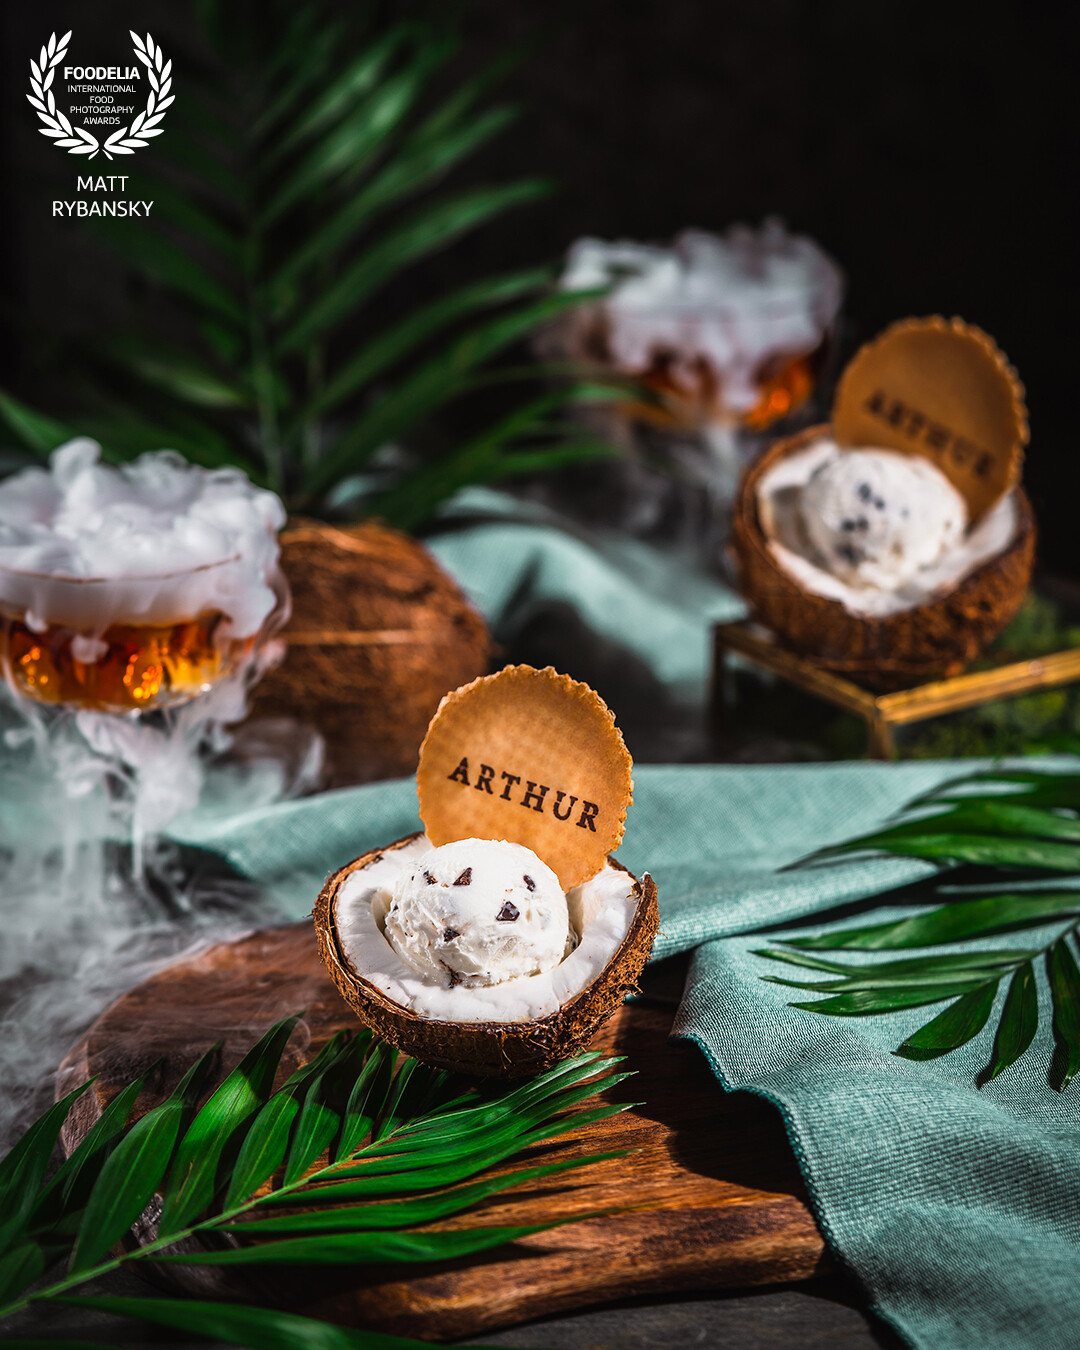 I did this photo with gelato in coconuts and I used dry ice for "eye catching" moment. Work with dry ice and rum is fun. :)